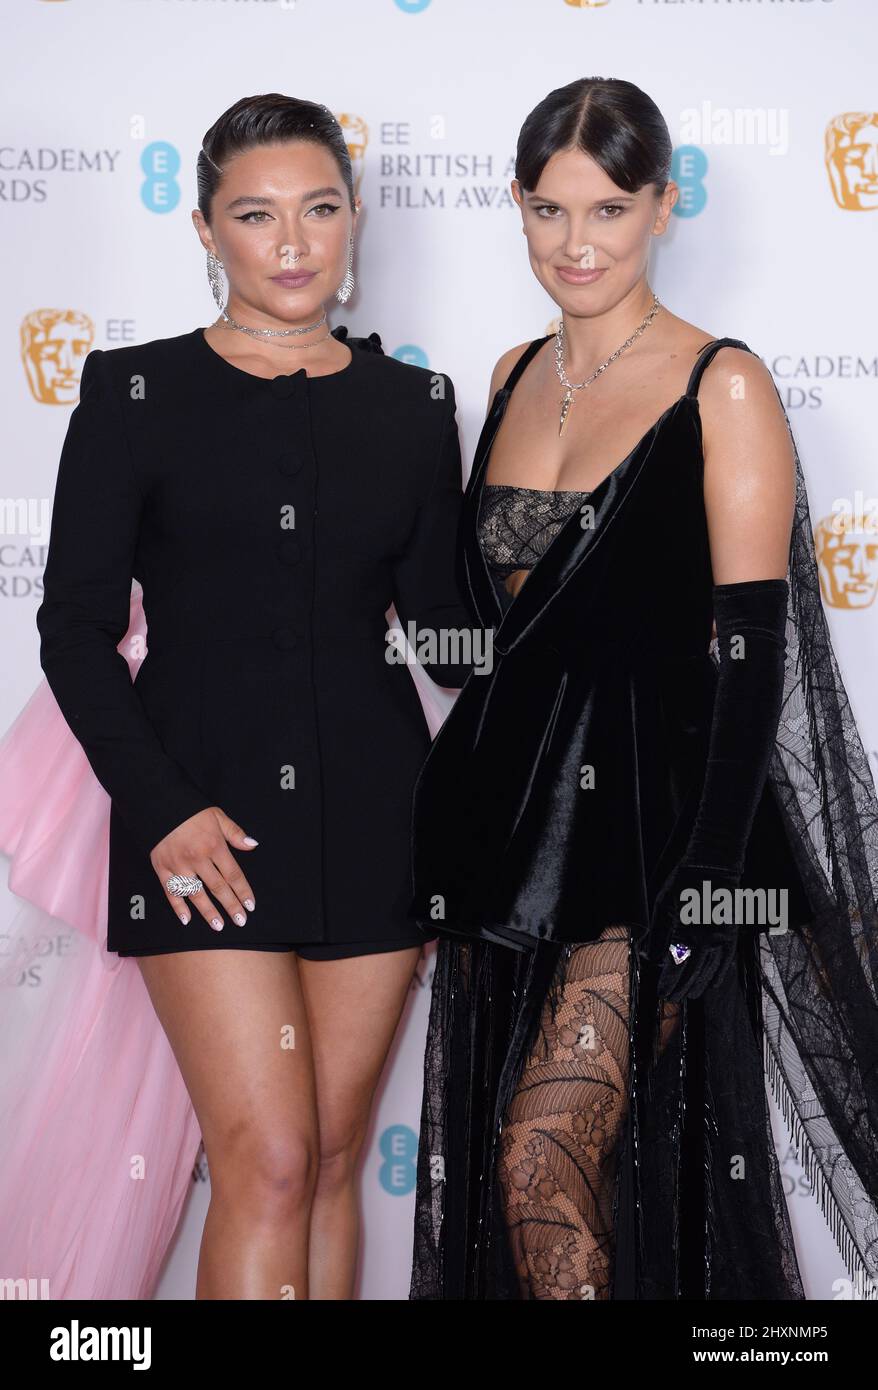 London, UK. March 12th, 2022. Florence Pugh and Millie Bobby Brown